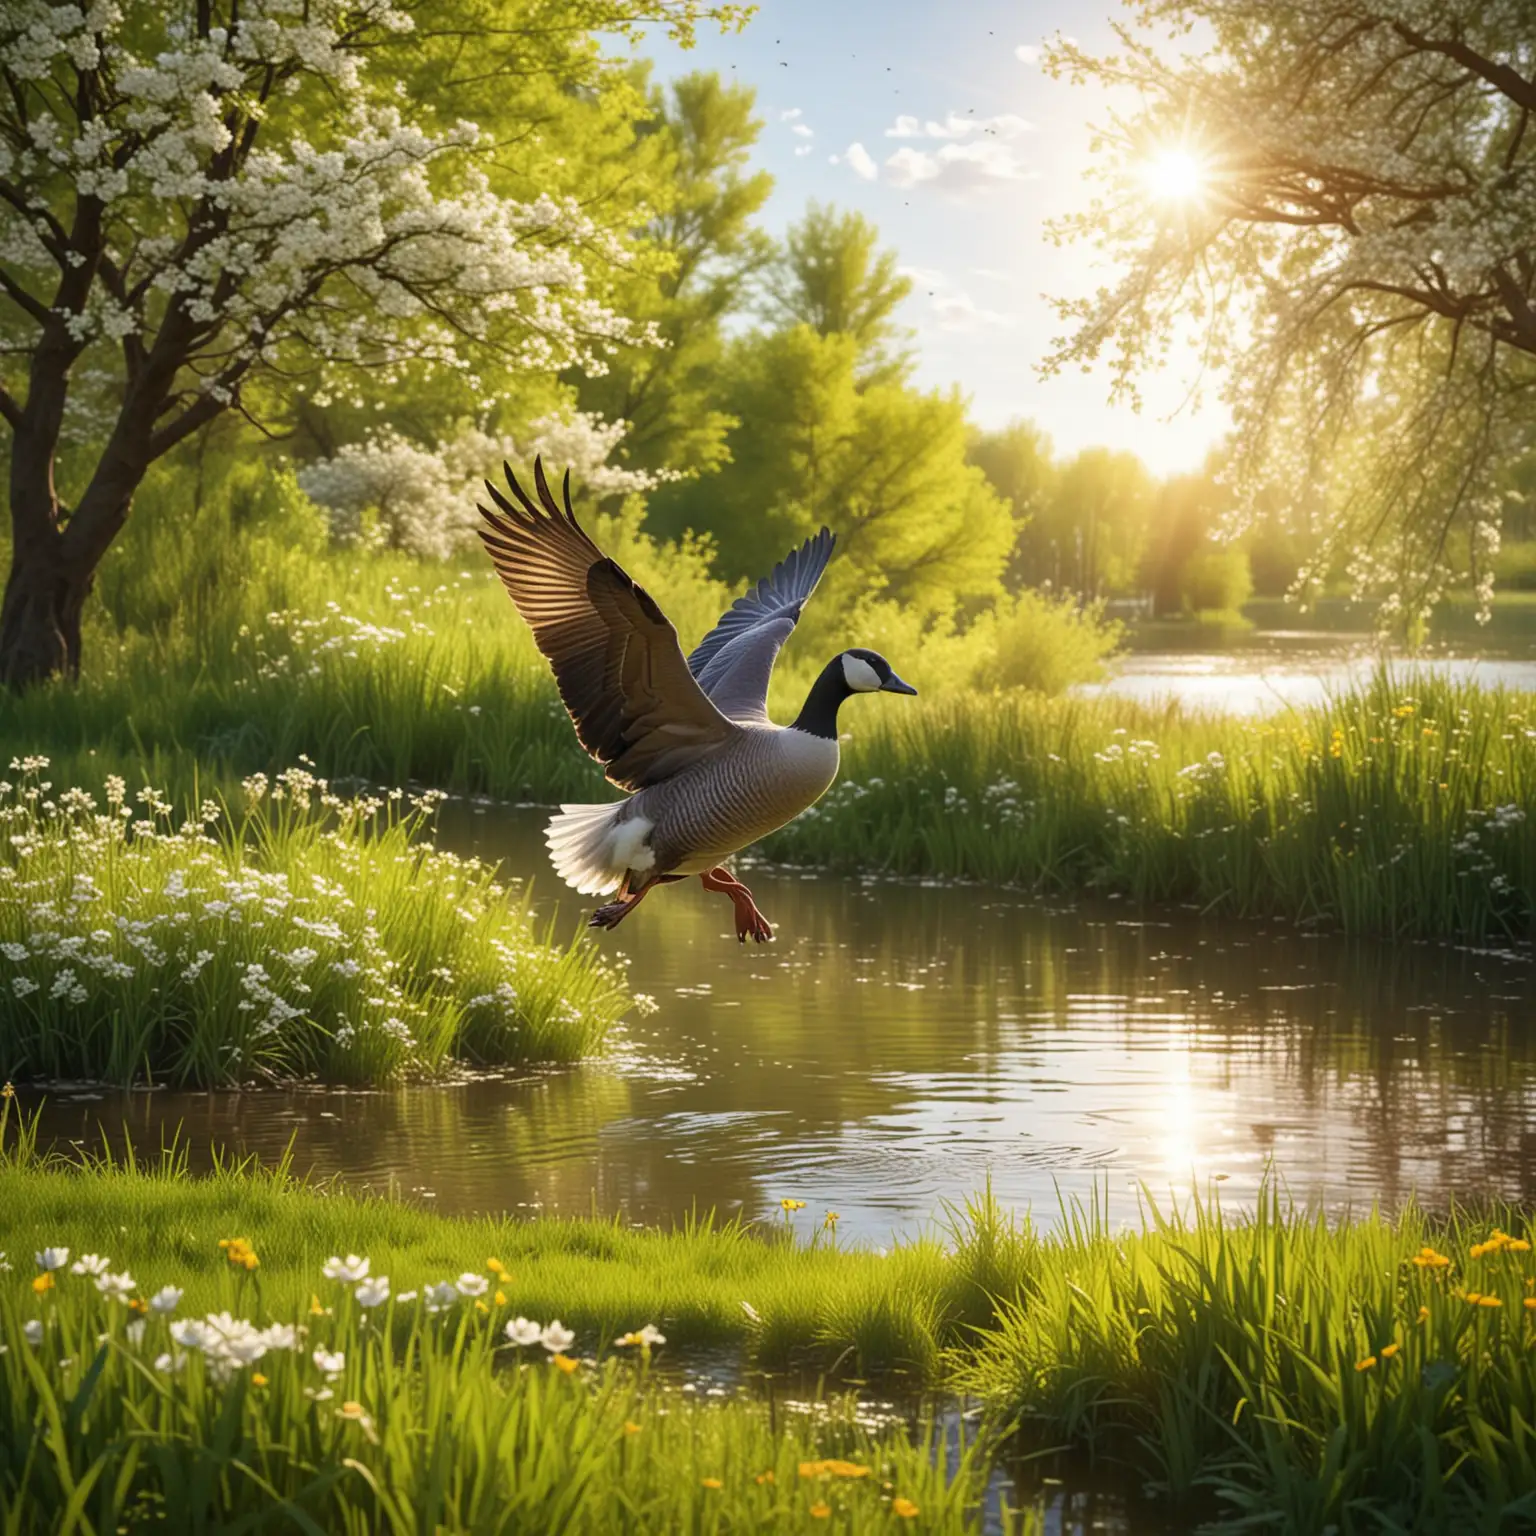 Wild Goose Landing on a Grassy Lake Shore with Blooming Trees and Warm Sunlight